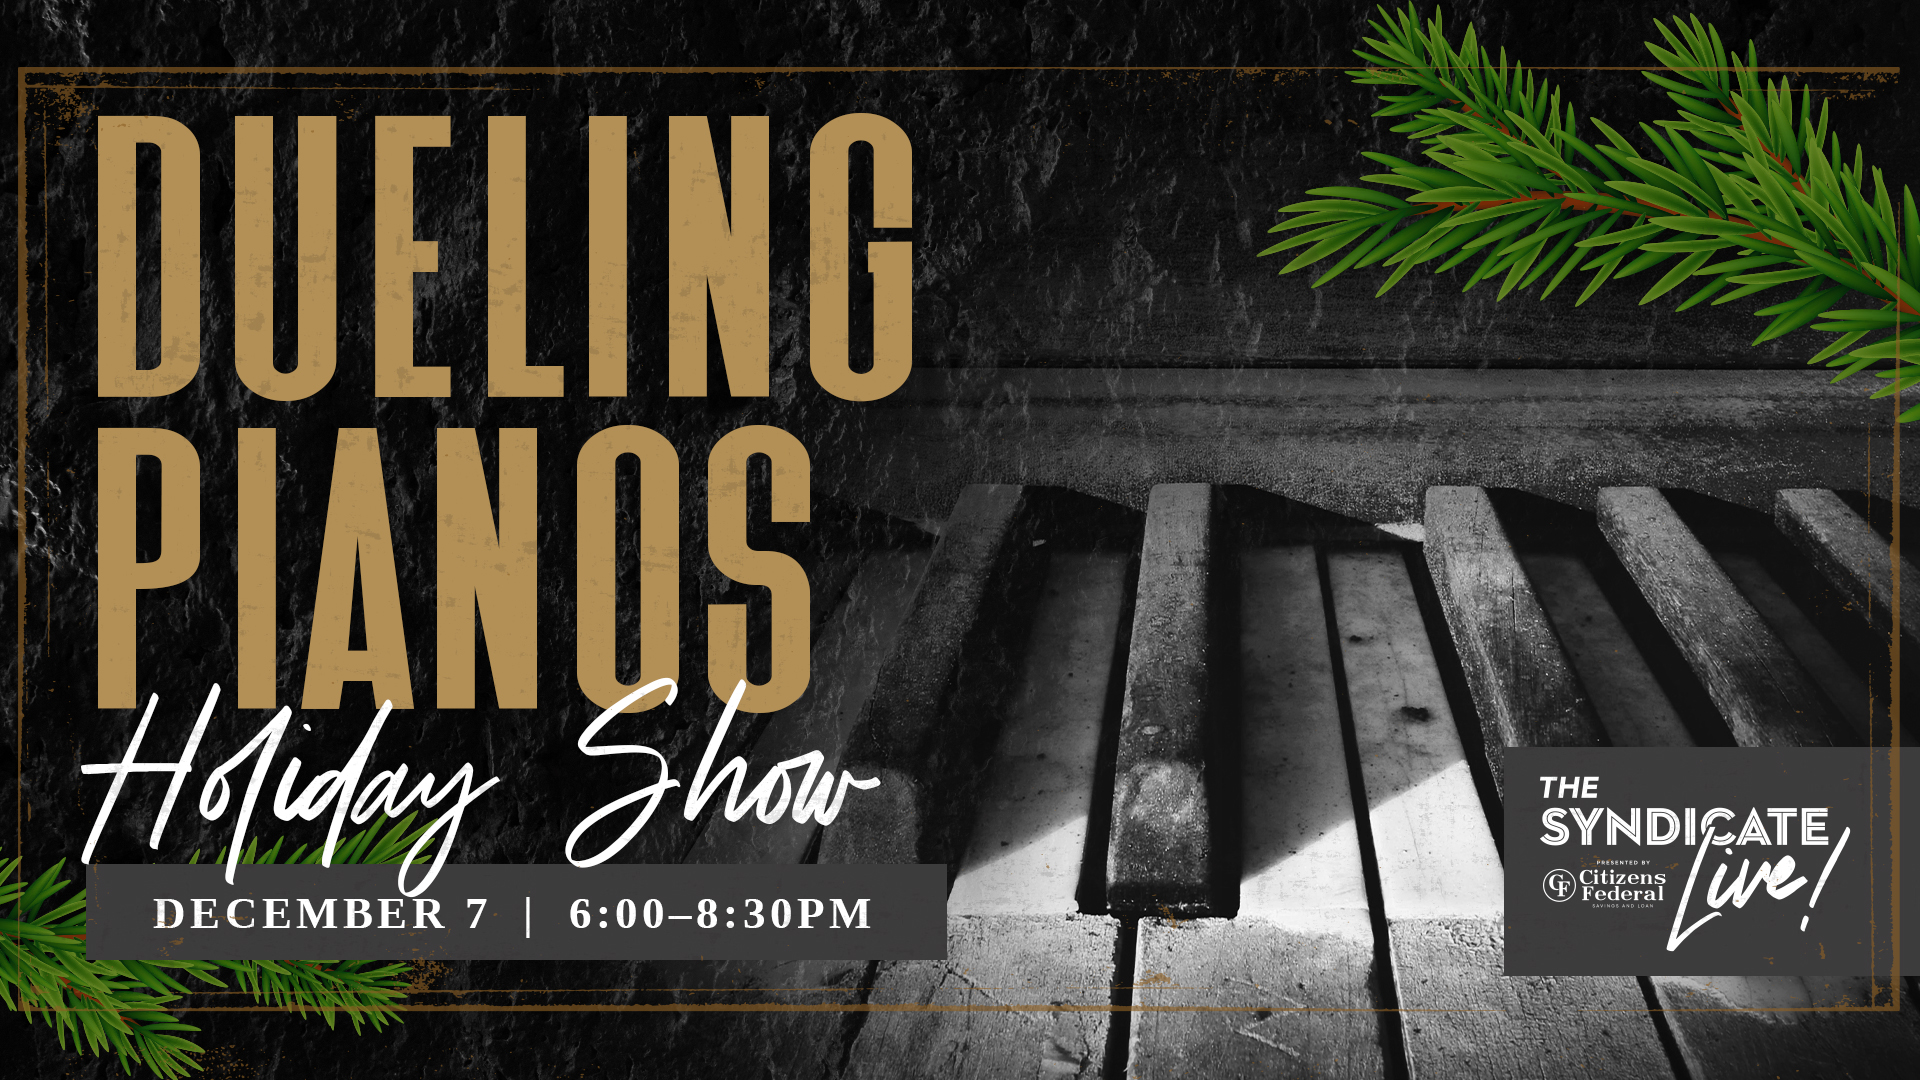 Holiday Dueling Pianos